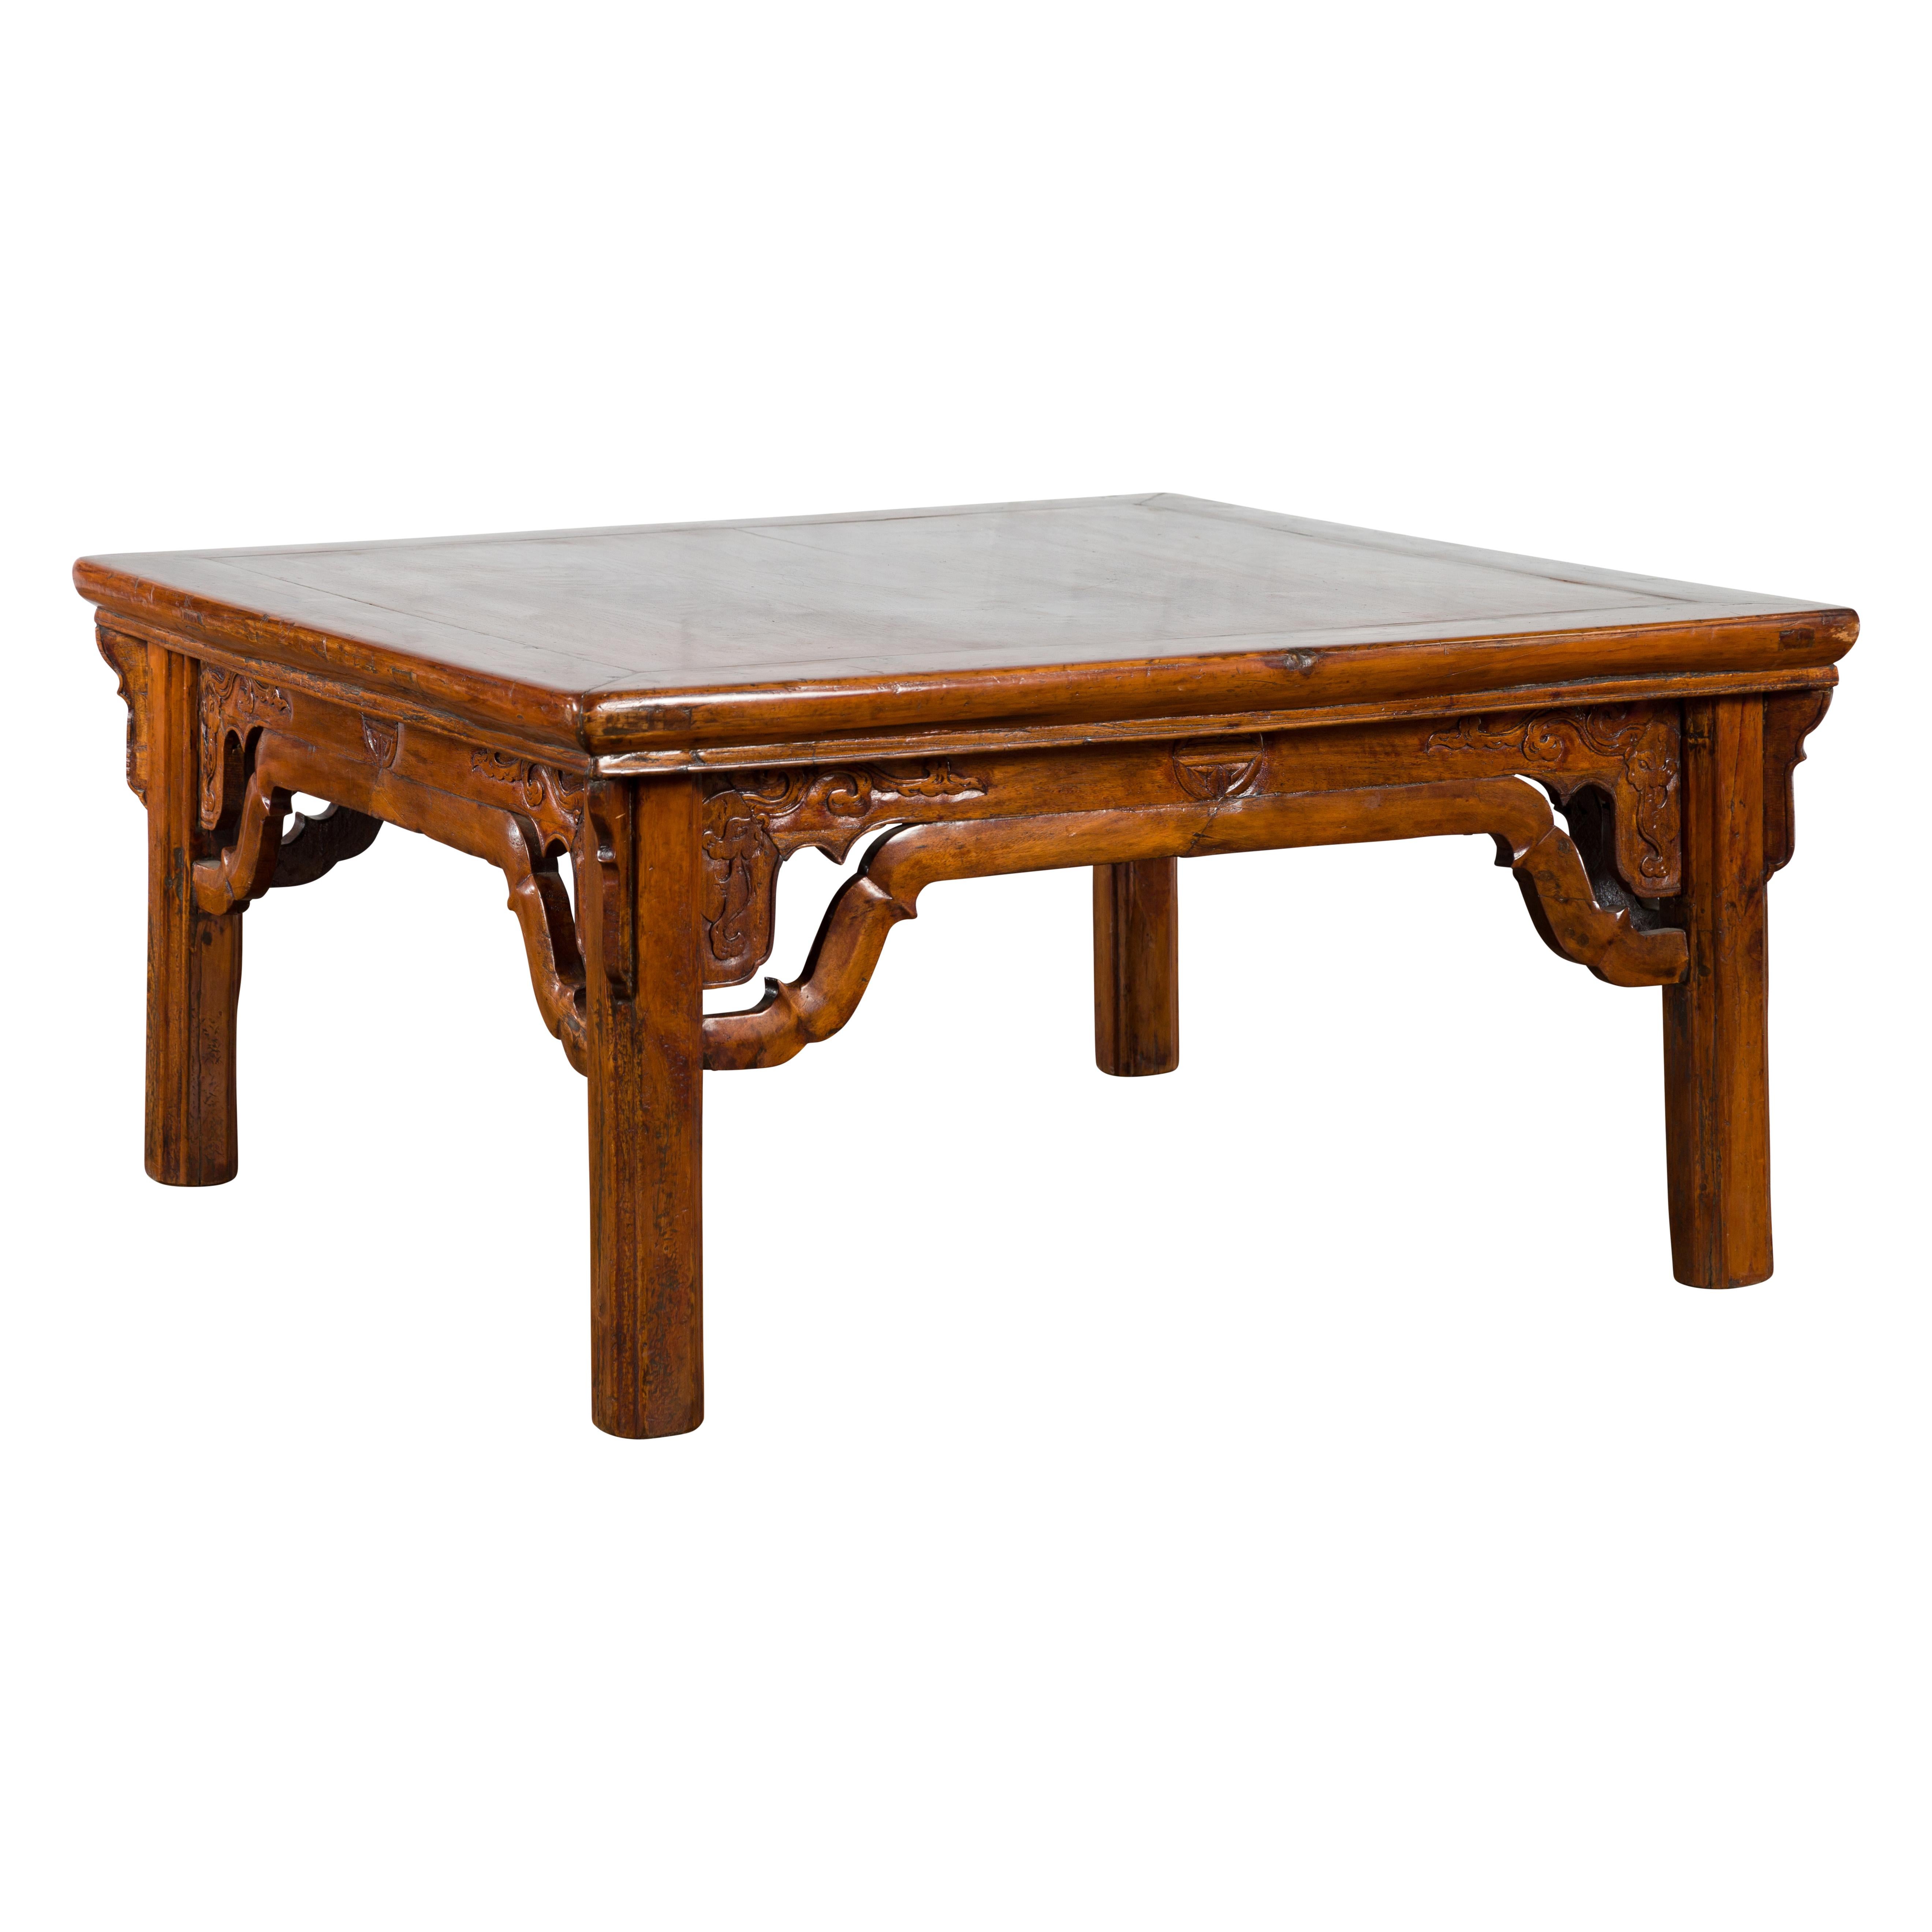 Chinese Qing Dynasty 19th Century Elmwood Coffee Table with Carved Apron For Sale 7